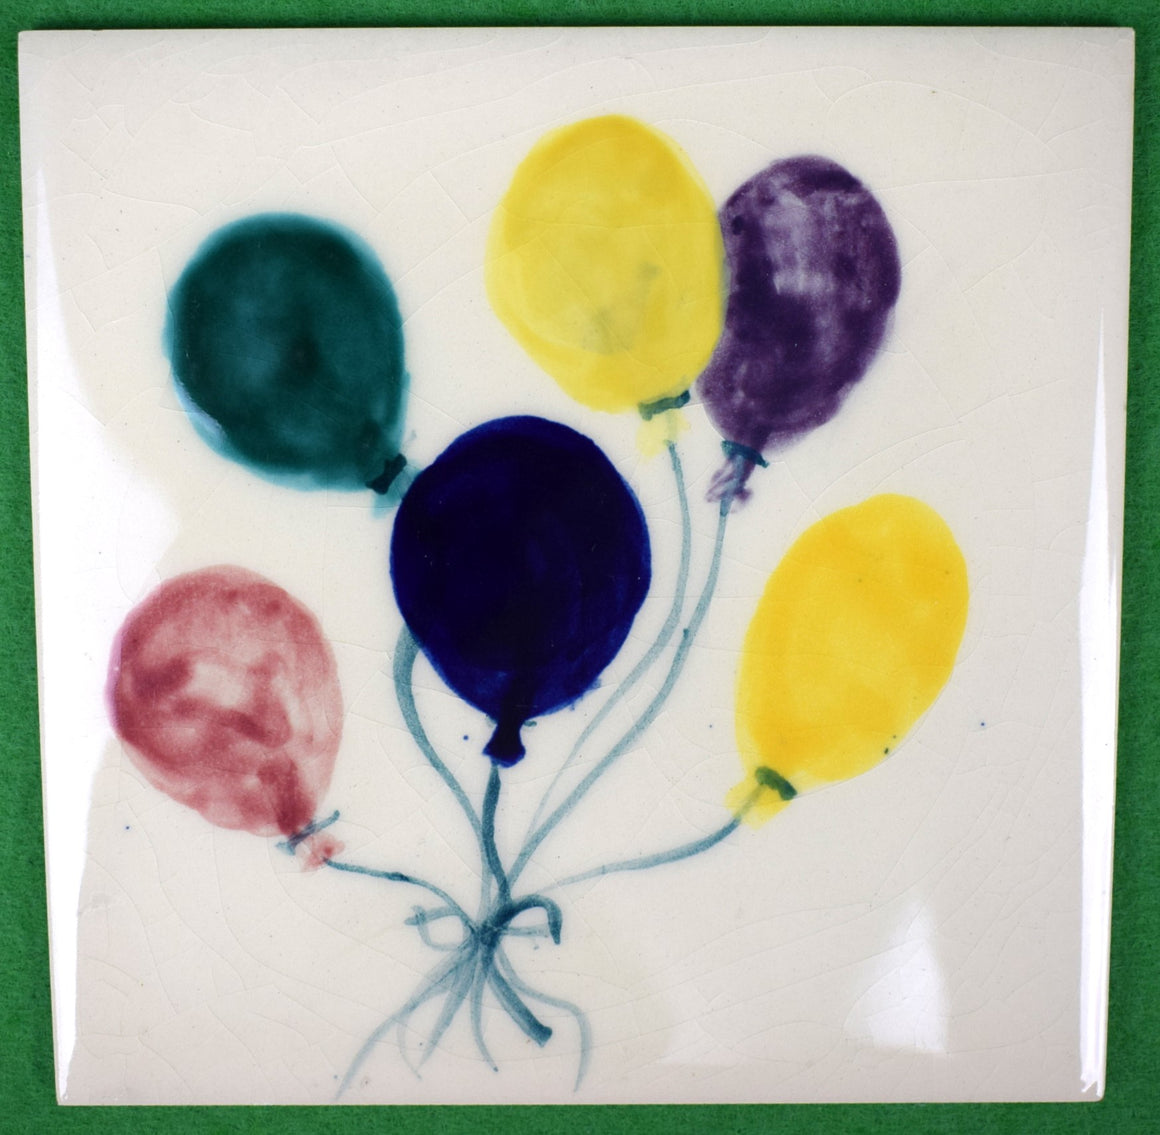 Porcelain Hand-Painted Balloons Pantry Tile/ Coaster Made In England